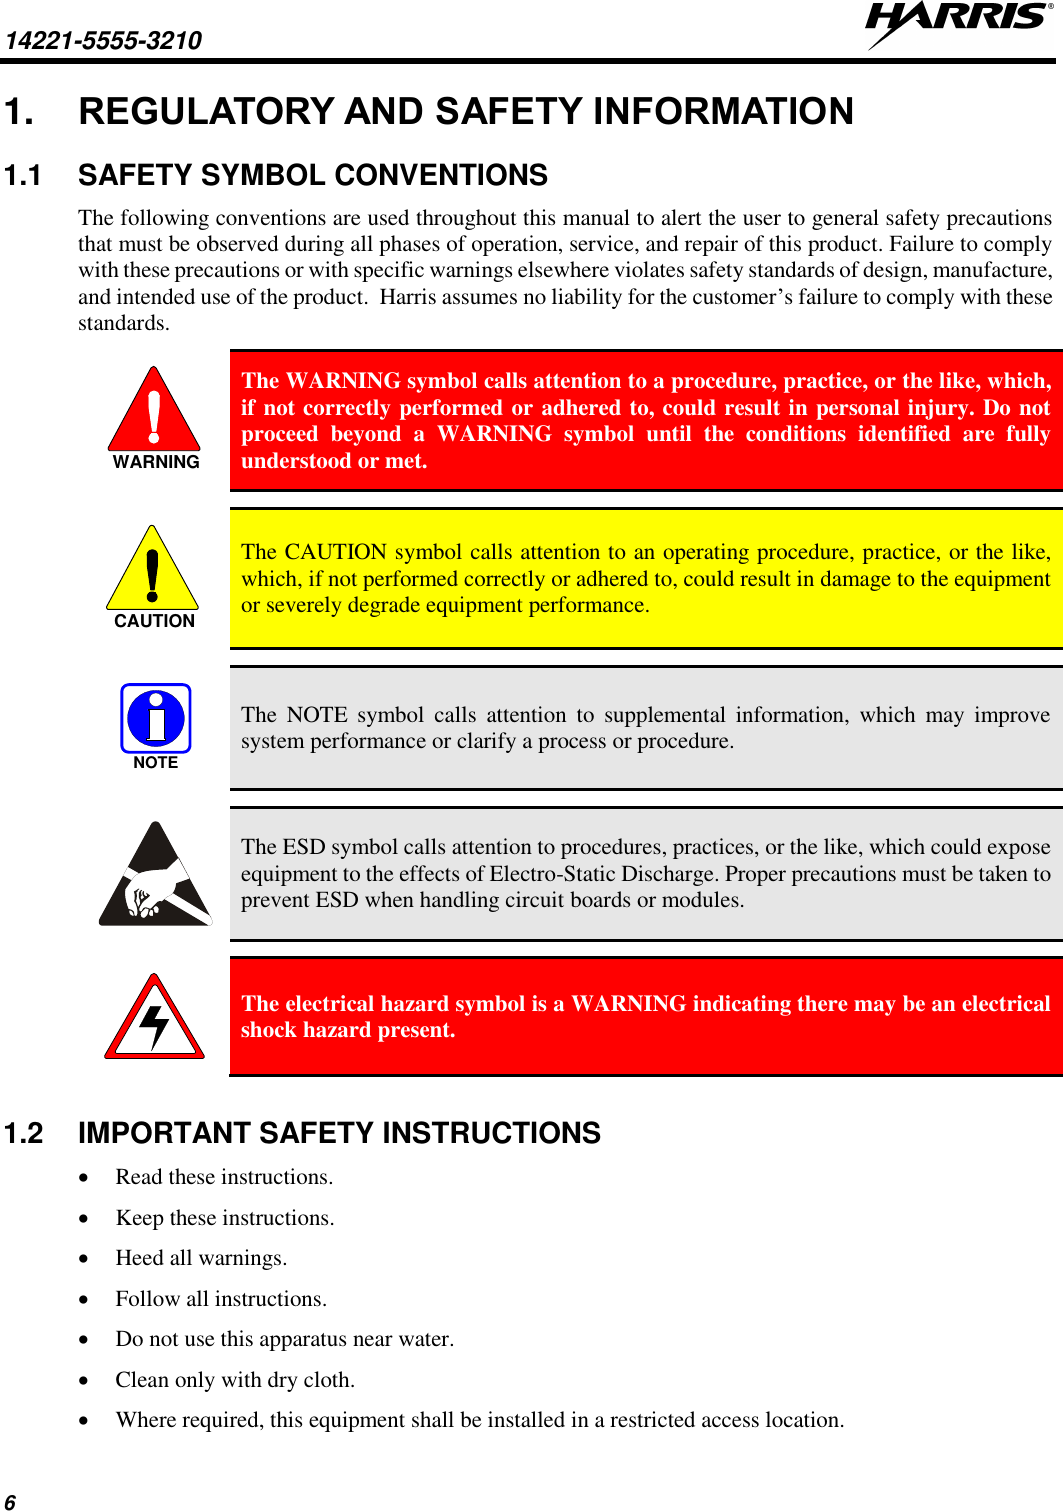 14221-5555-3210   6 1. REGULATORY AND SAFETY INFORMATION 1.1  SAFETY SYMBOL CONVENTIONS The following conventions are used throughout this manual to alert the user to general safety precautions that must be observed during all phases of operation, service, and repair of this product. Failure to comply with these precautions or with specific warnings elsewhere violates safety standards of design, manufacture, and intended use of the product.  Harris assumes no liability for the customer’s failure to comply with these standards.  The WARNING symbol calls attention to a procedure, practice, or the like, which, if not correctly performed or adhered to, could result in personal injury. Do not proceed  beyond  a  WARNING  symbol  until  the  conditions  identified  are  fully understood or met.    The CAUTION symbol calls attention to an operating procedure, practice, or the like, which, if not performed correctly or adhered to, could result in damage to the equipment or severely degrade equipment performance.    The  NOTE  symbol  calls  attention  to  supplemental  information,  which  may  improve system performance or clarify a process or procedure.    The ESD symbol calls attention to procedures, practices, or the like, which could expose equipment to the effects of Electro-Static Discharge. Proper precautions must be taken to prevent ESD when handling circuit boards or modules.    The electrical hazard symbol is a WARNING indicating there may be an electrical shock hazard present.  1.2  IMPORTANT SAFETY INSTRUCTIONS • Read these instructions. • Keep these instructions. • Heed all warnings. • Follow all instructions. • Do not use this apparatus near water. • Clean only with dry cloth. • Where required, this equipment shall be installed in a restricted access location. WARNINGCAUTIONNOTE